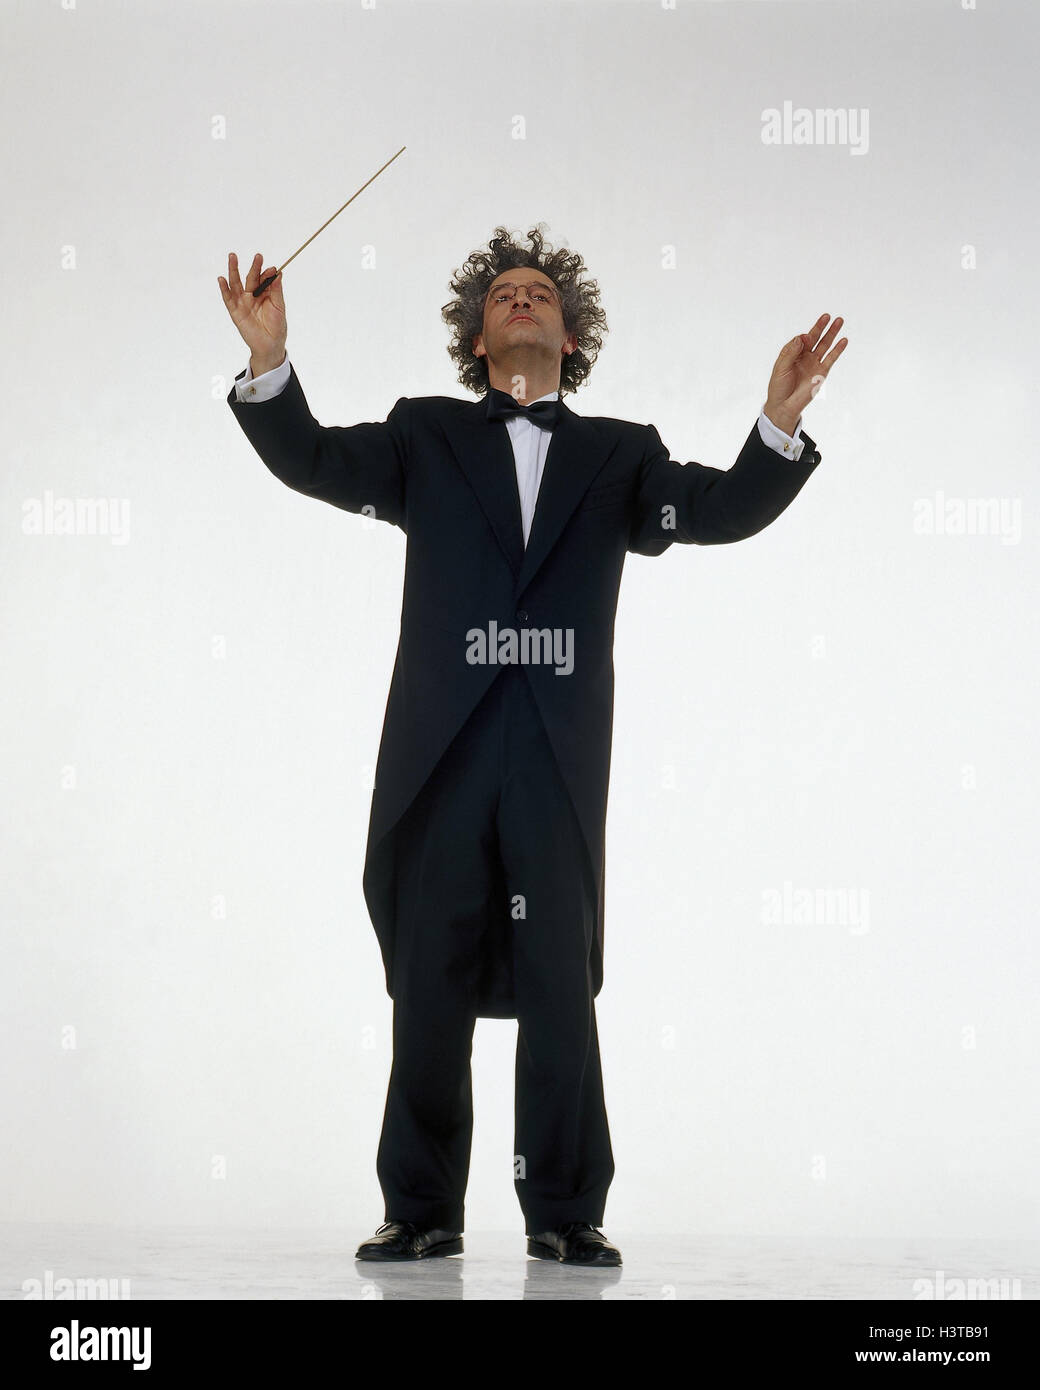 Conductor, professions, studio, cut outs, conduct, man, middle old person, occupation, music, classical music, classically, artistically, conductor, choir, orchestra, gesture, orchestra conductor, working clothes, tails, conductor's baton, concentration, Stock Photo